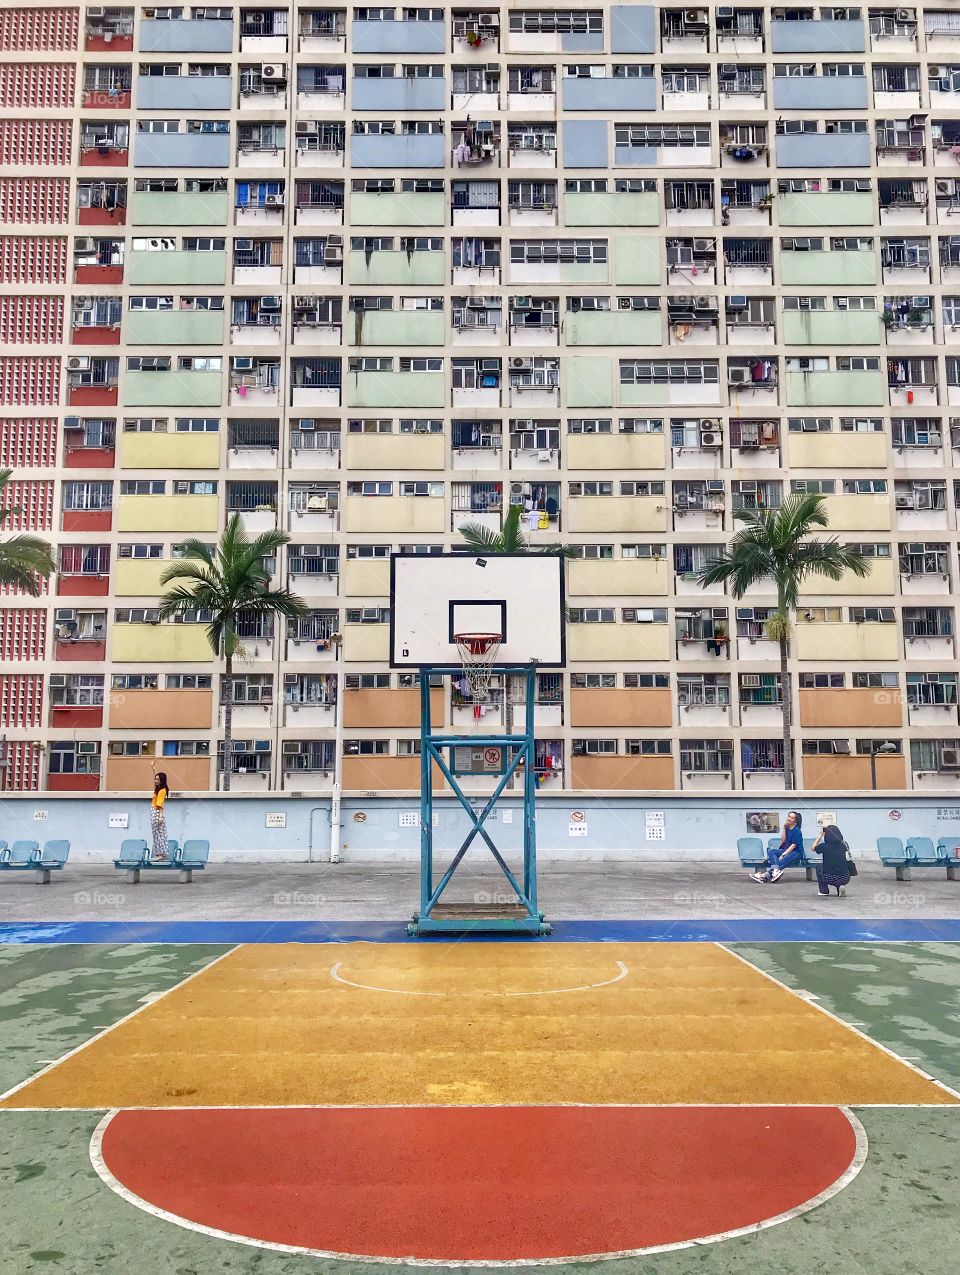 Rainbow building and basketball court